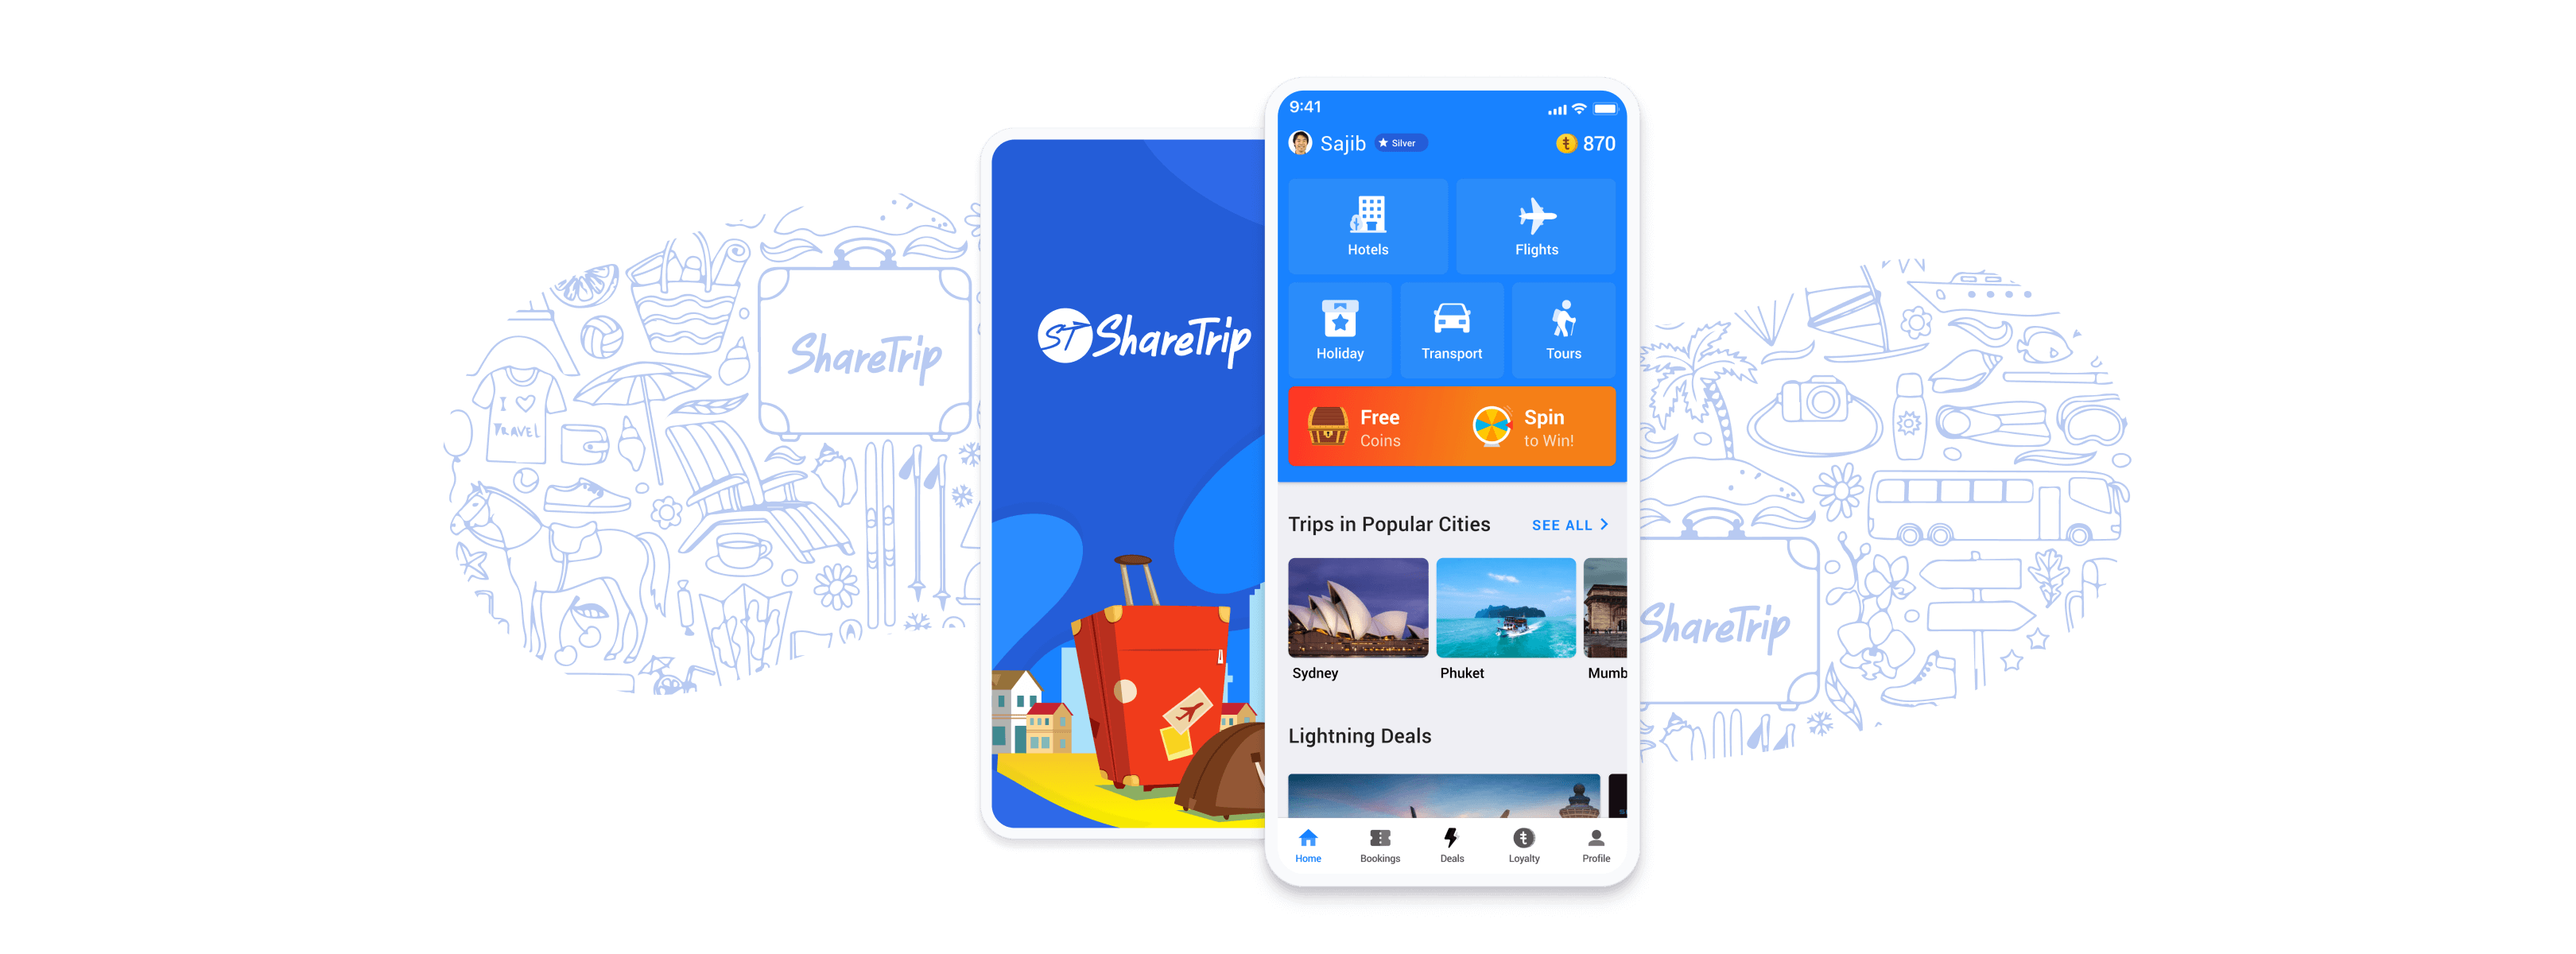 ShareTrip is the pioneer online travel aggregator (OTA) in Bangladesh. Initially, it was providing offline flights, hotels, and holiday package booking services.